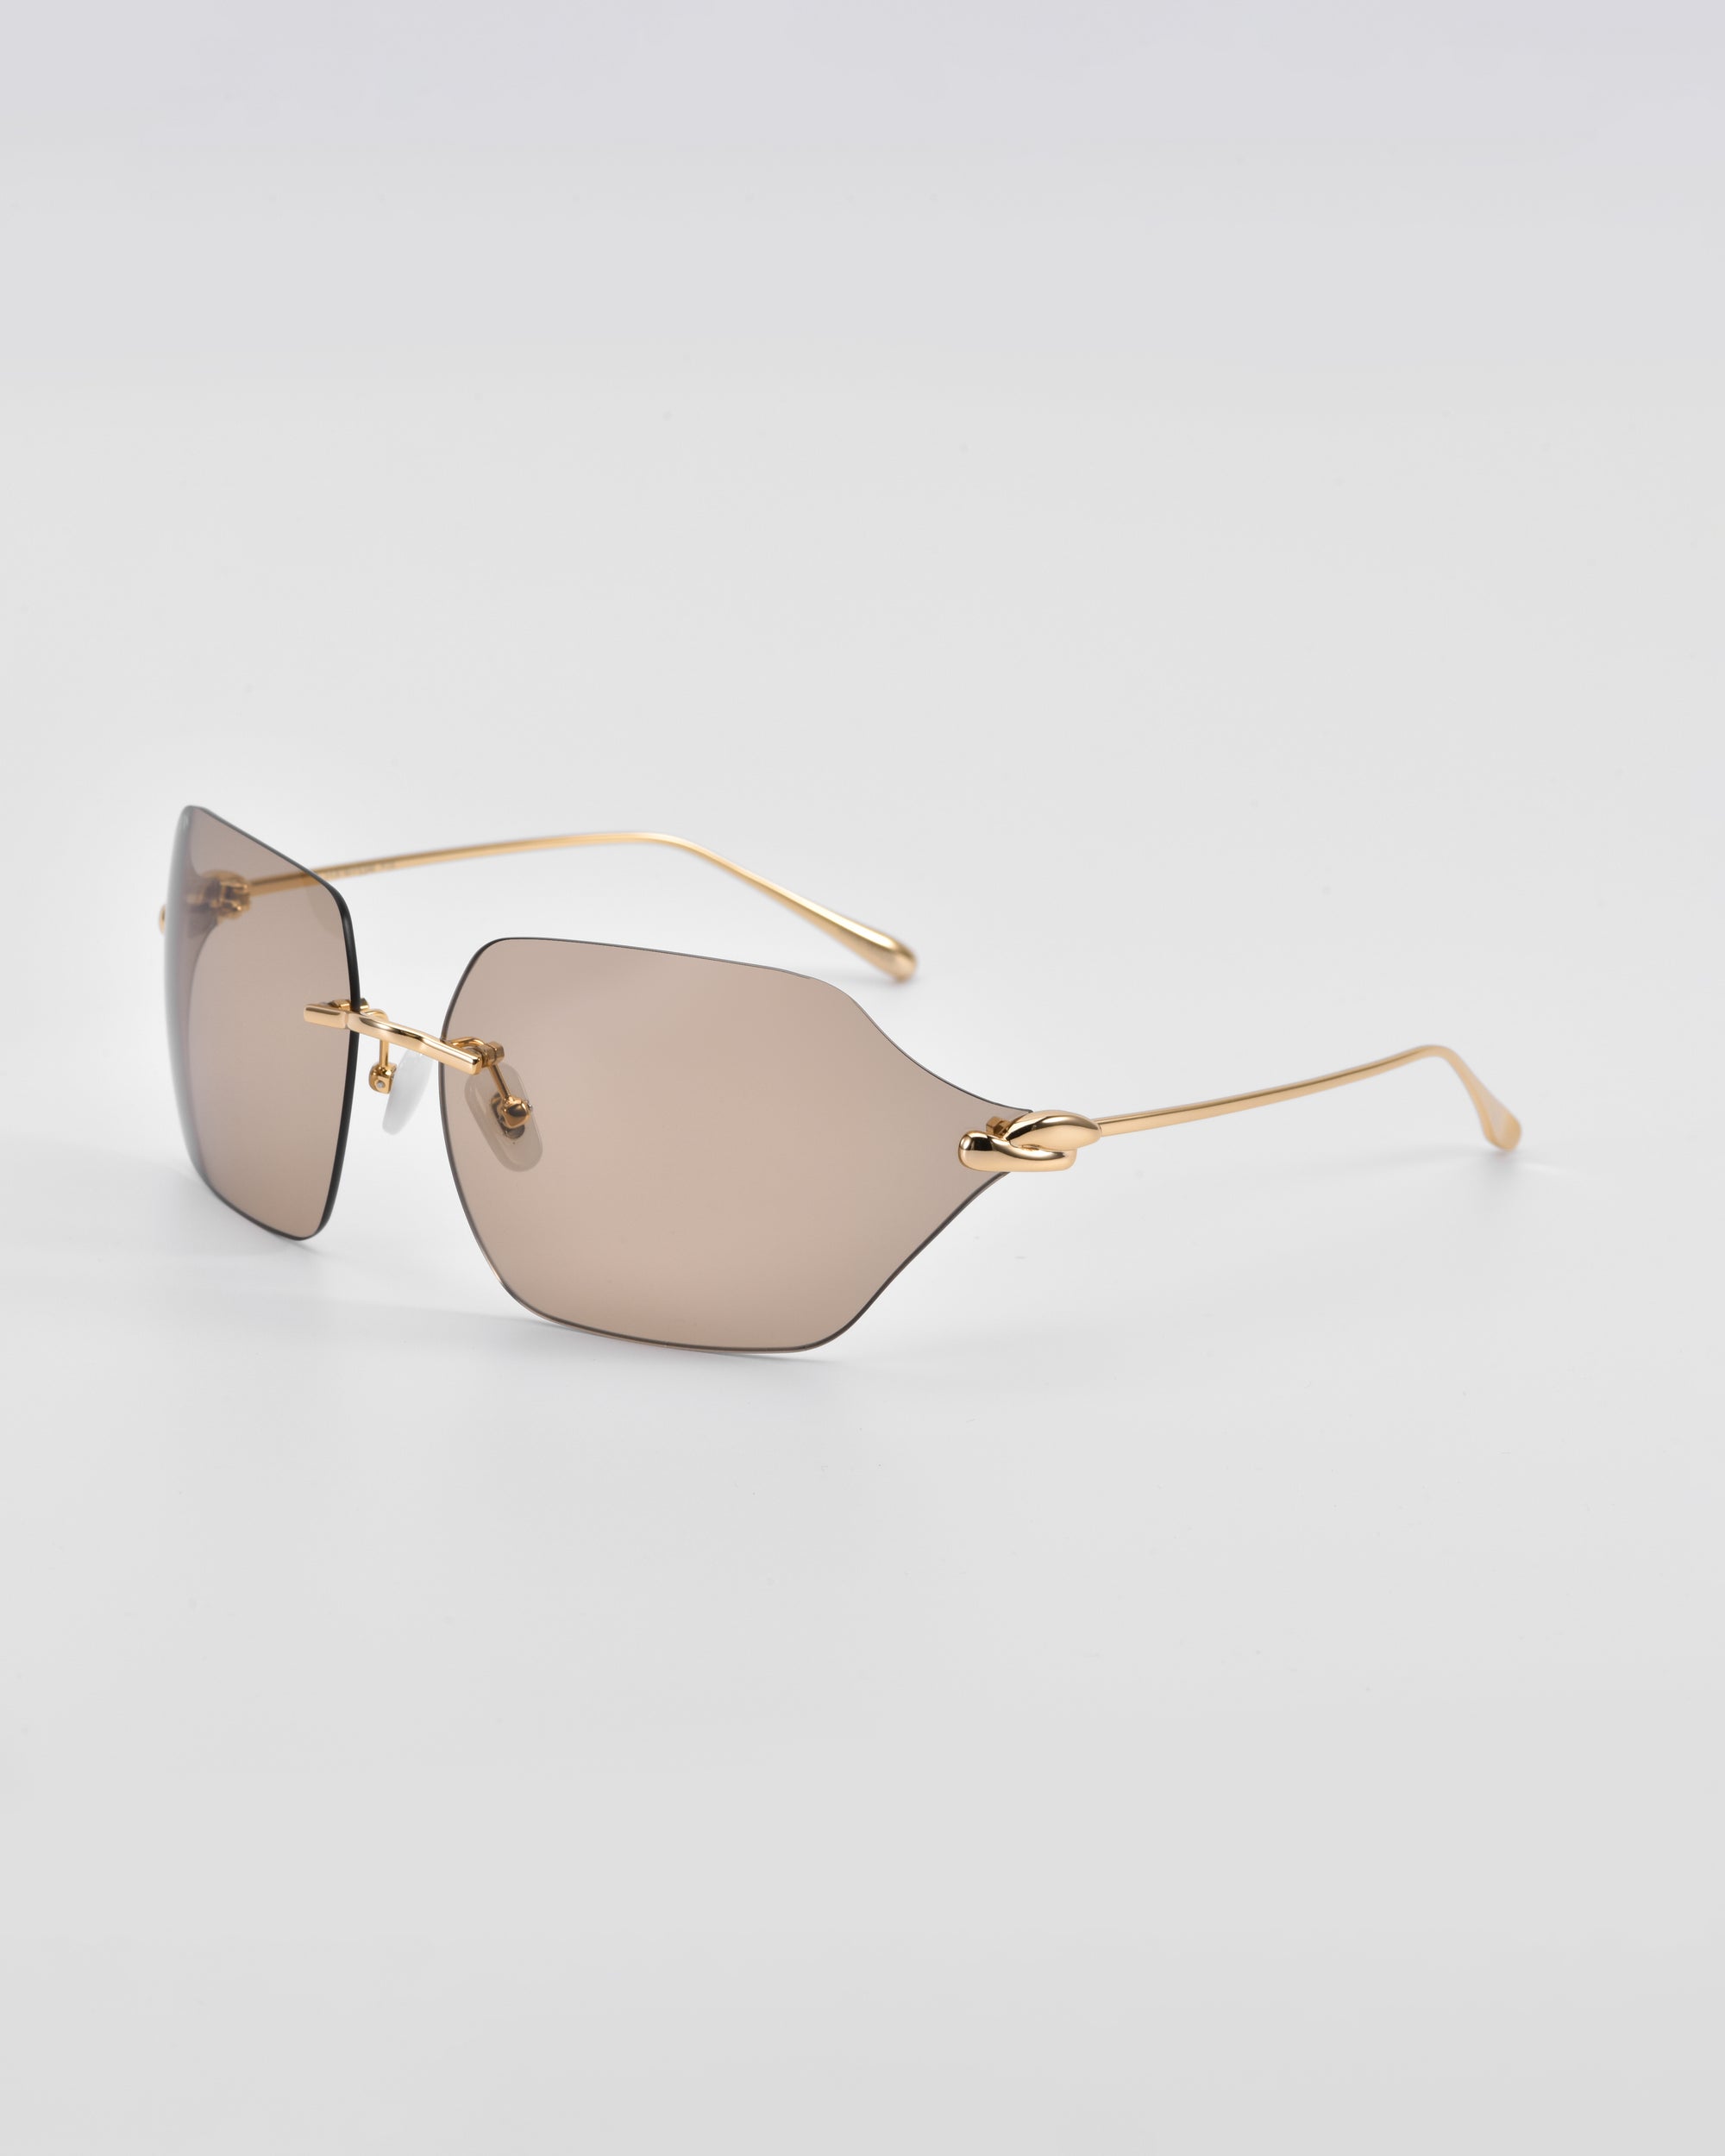 A pair of For Art&#39;s Sake® Serpent II sunglasses with rectangular, frameless wrap lens design and thin, 18-karat gold-plated arms. The brown-tinted lenses are showcased on a clean white background, highlighting their minimalist and modern aesthetic.